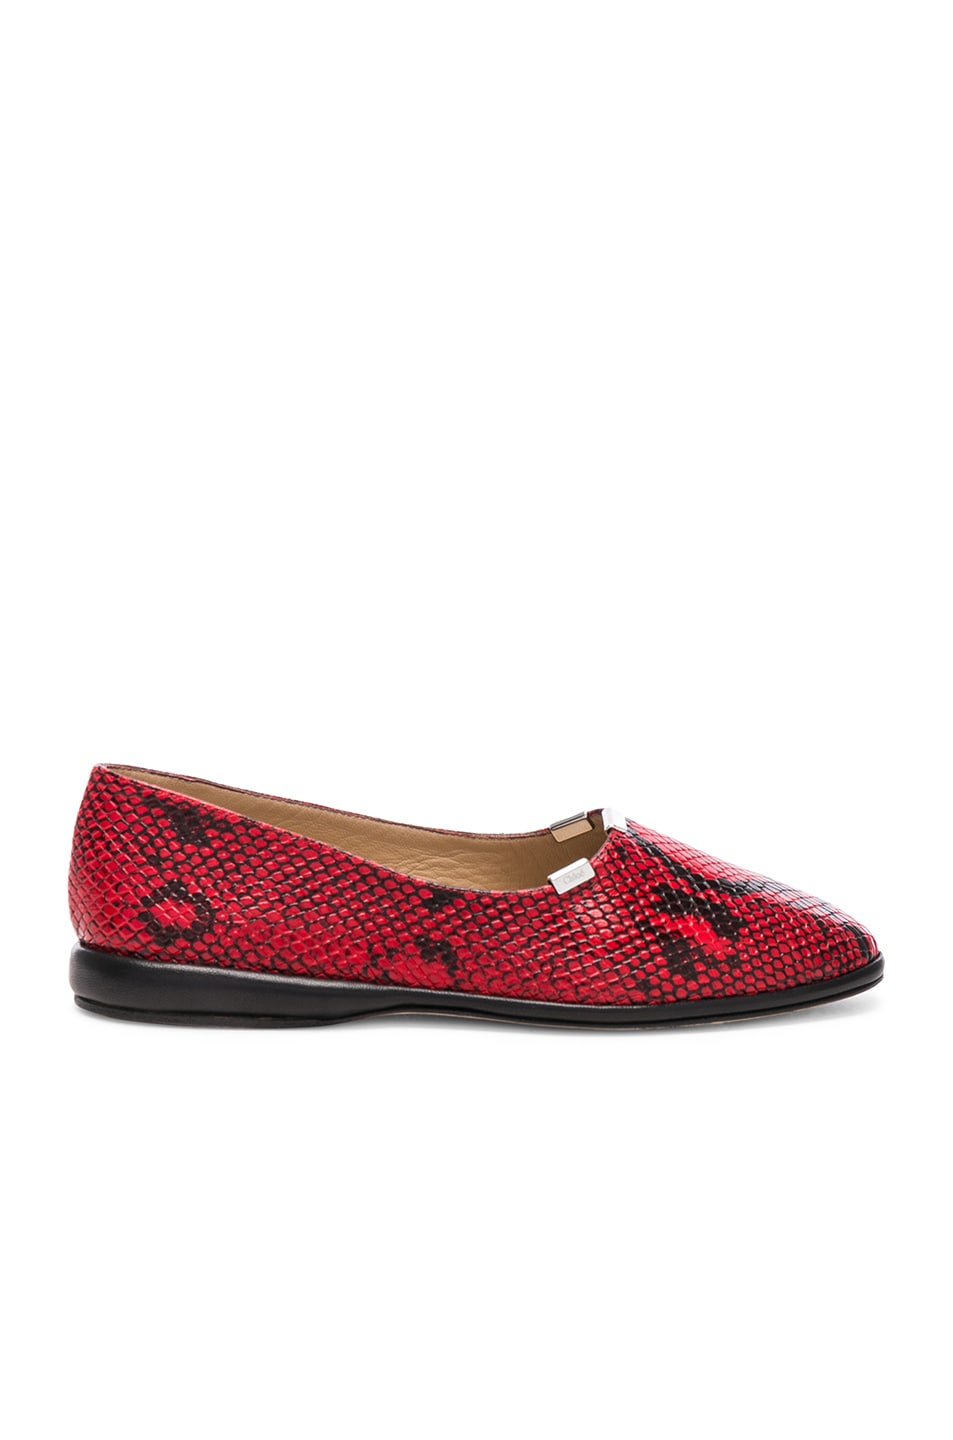 Image 1 of Chloe Skye Python Print Leather Flats in Gypsy Red